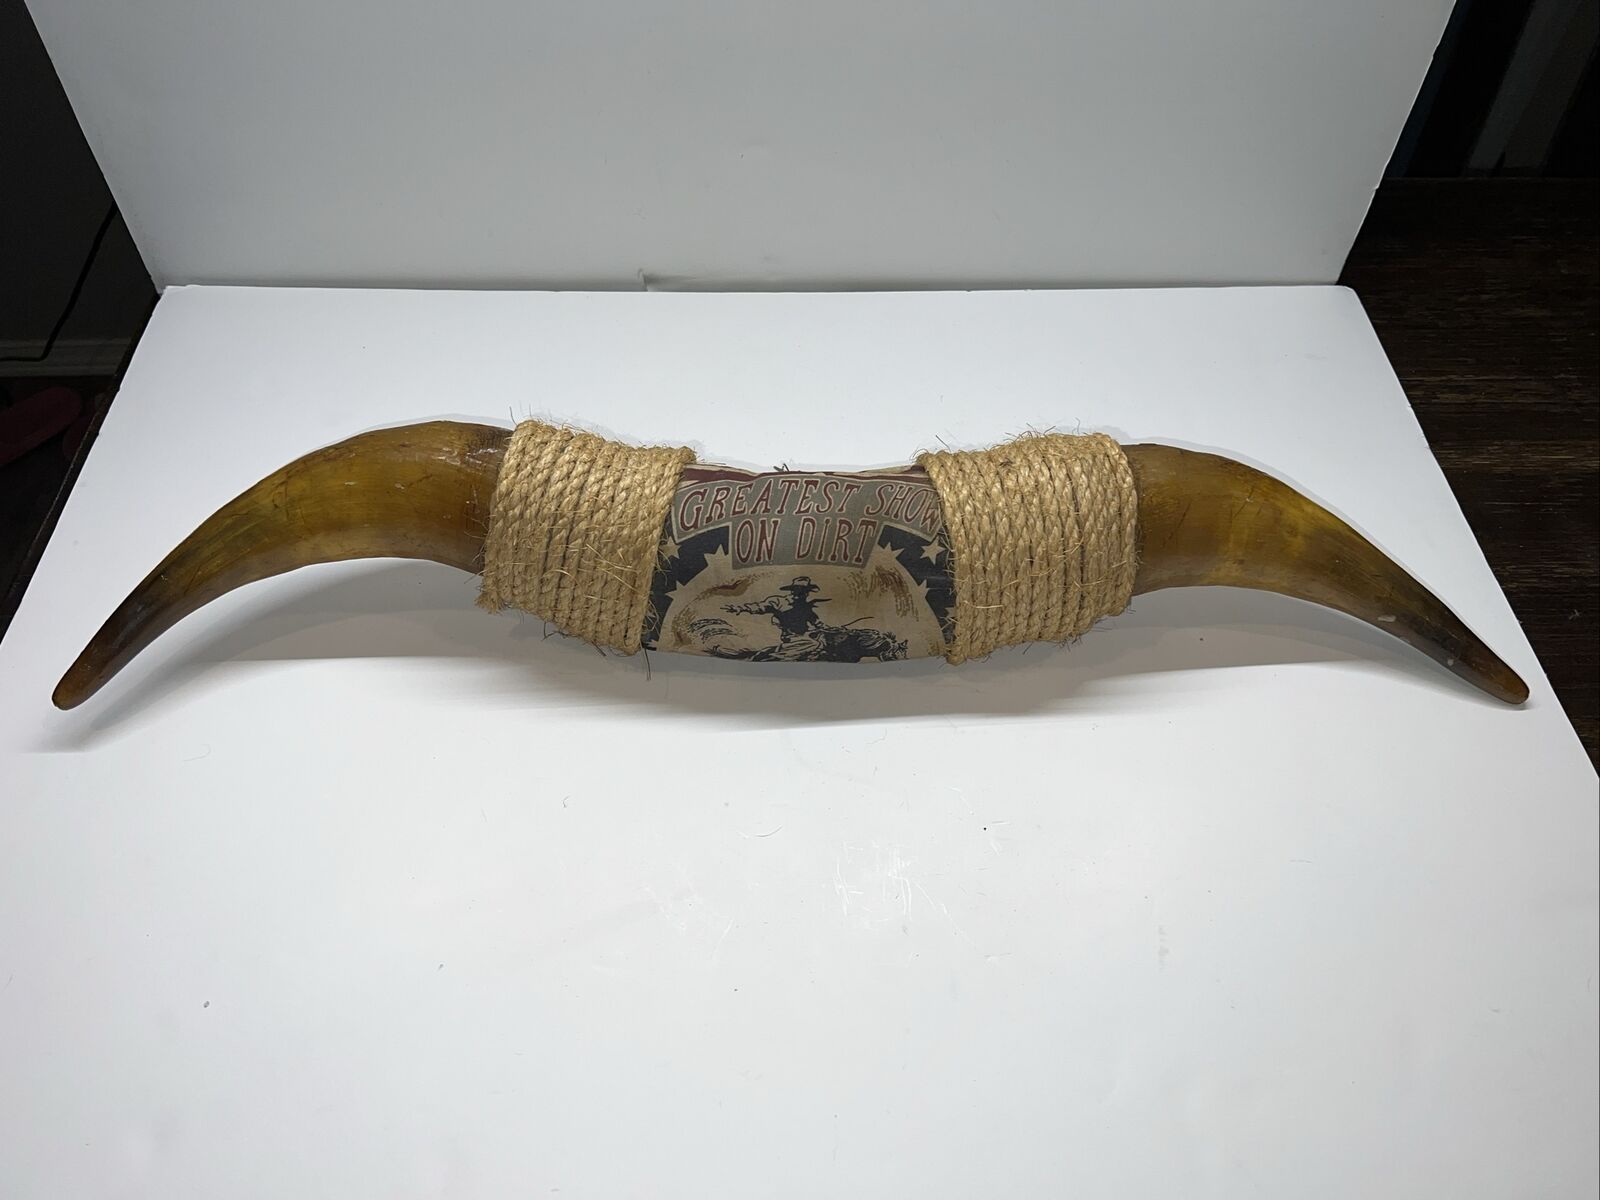 Vintage 27” Souvenir Mounted Bull Real Horns - Greatest Show On Dirt